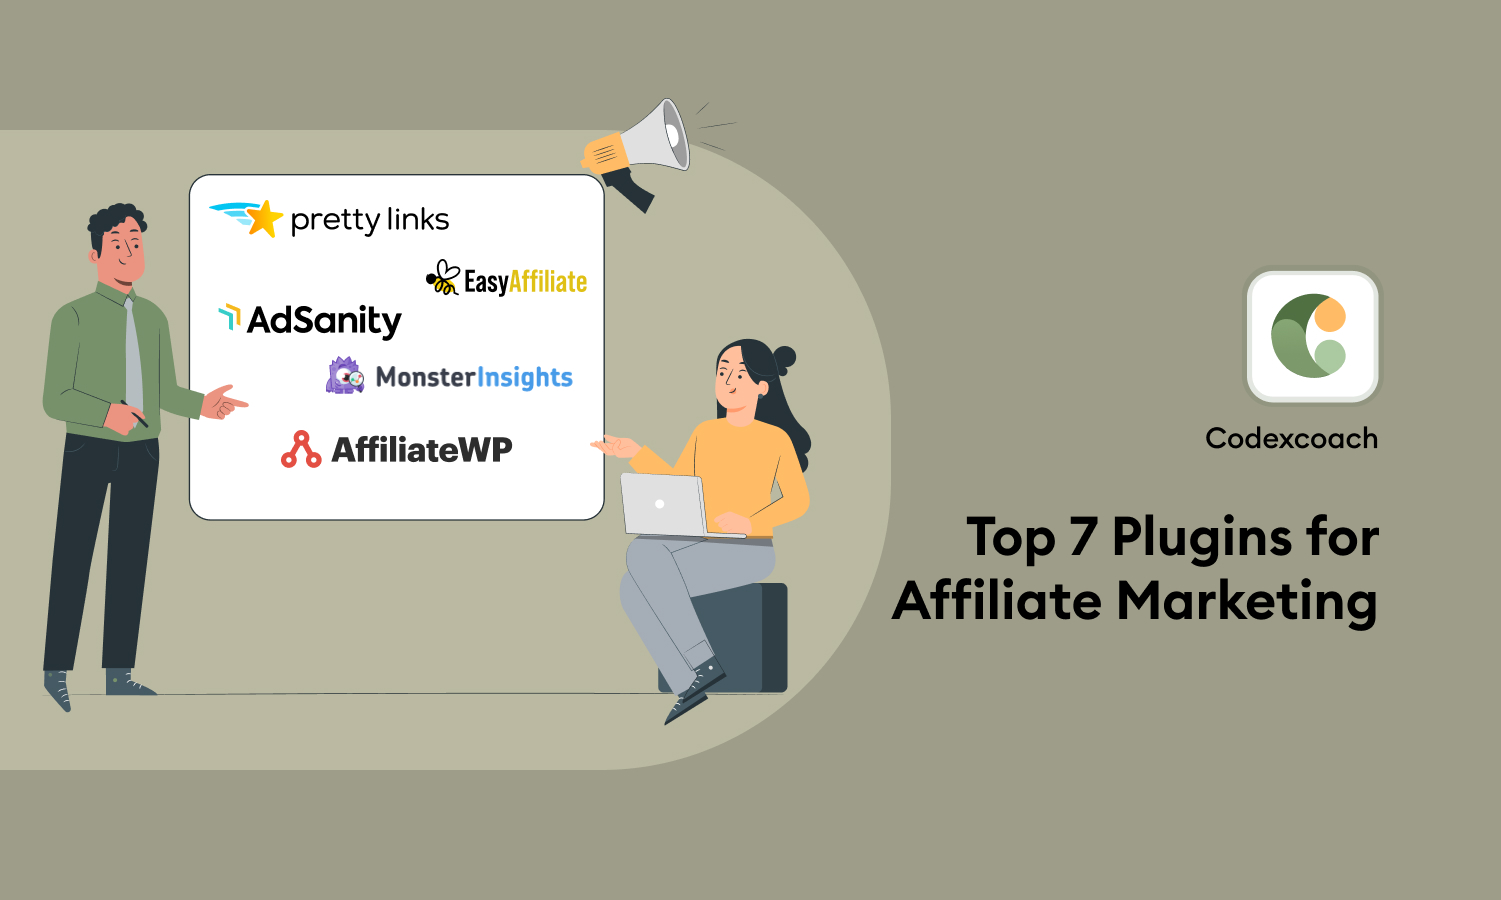 Top 7 Plugins for Affiliate Marketing